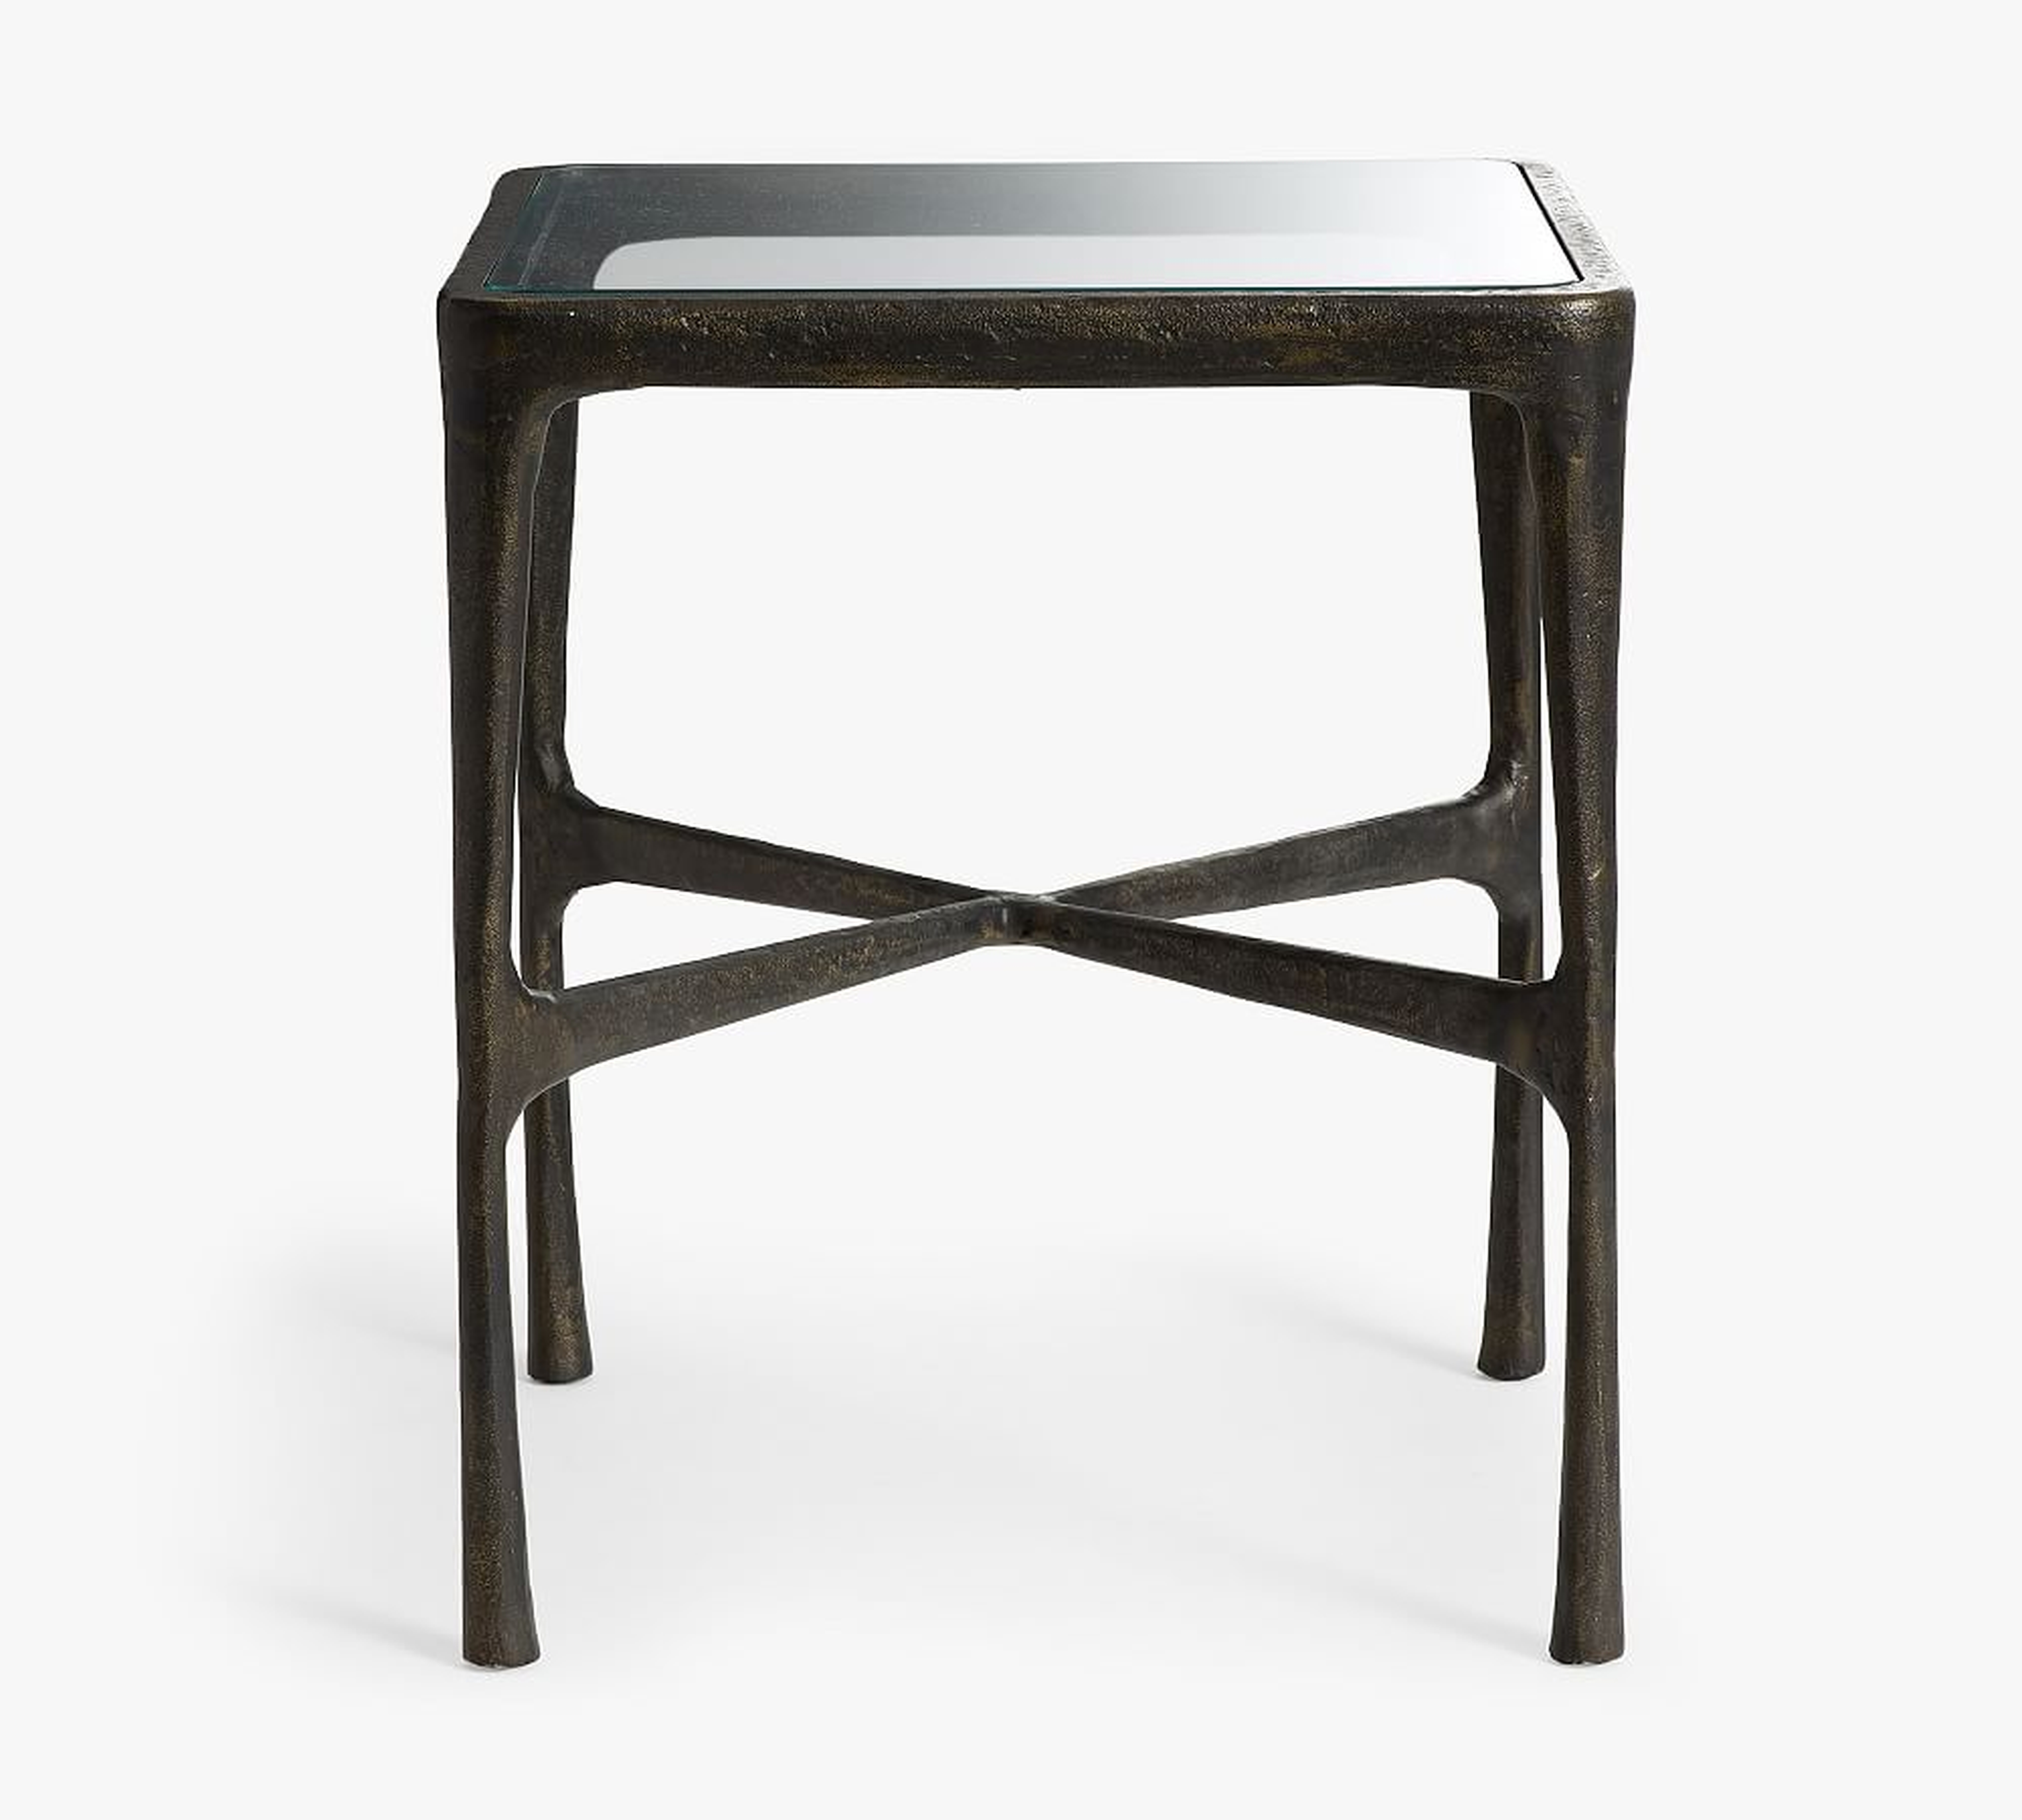 Bodhi 20" Square Metal End Table, Bronze - Pottery Barn